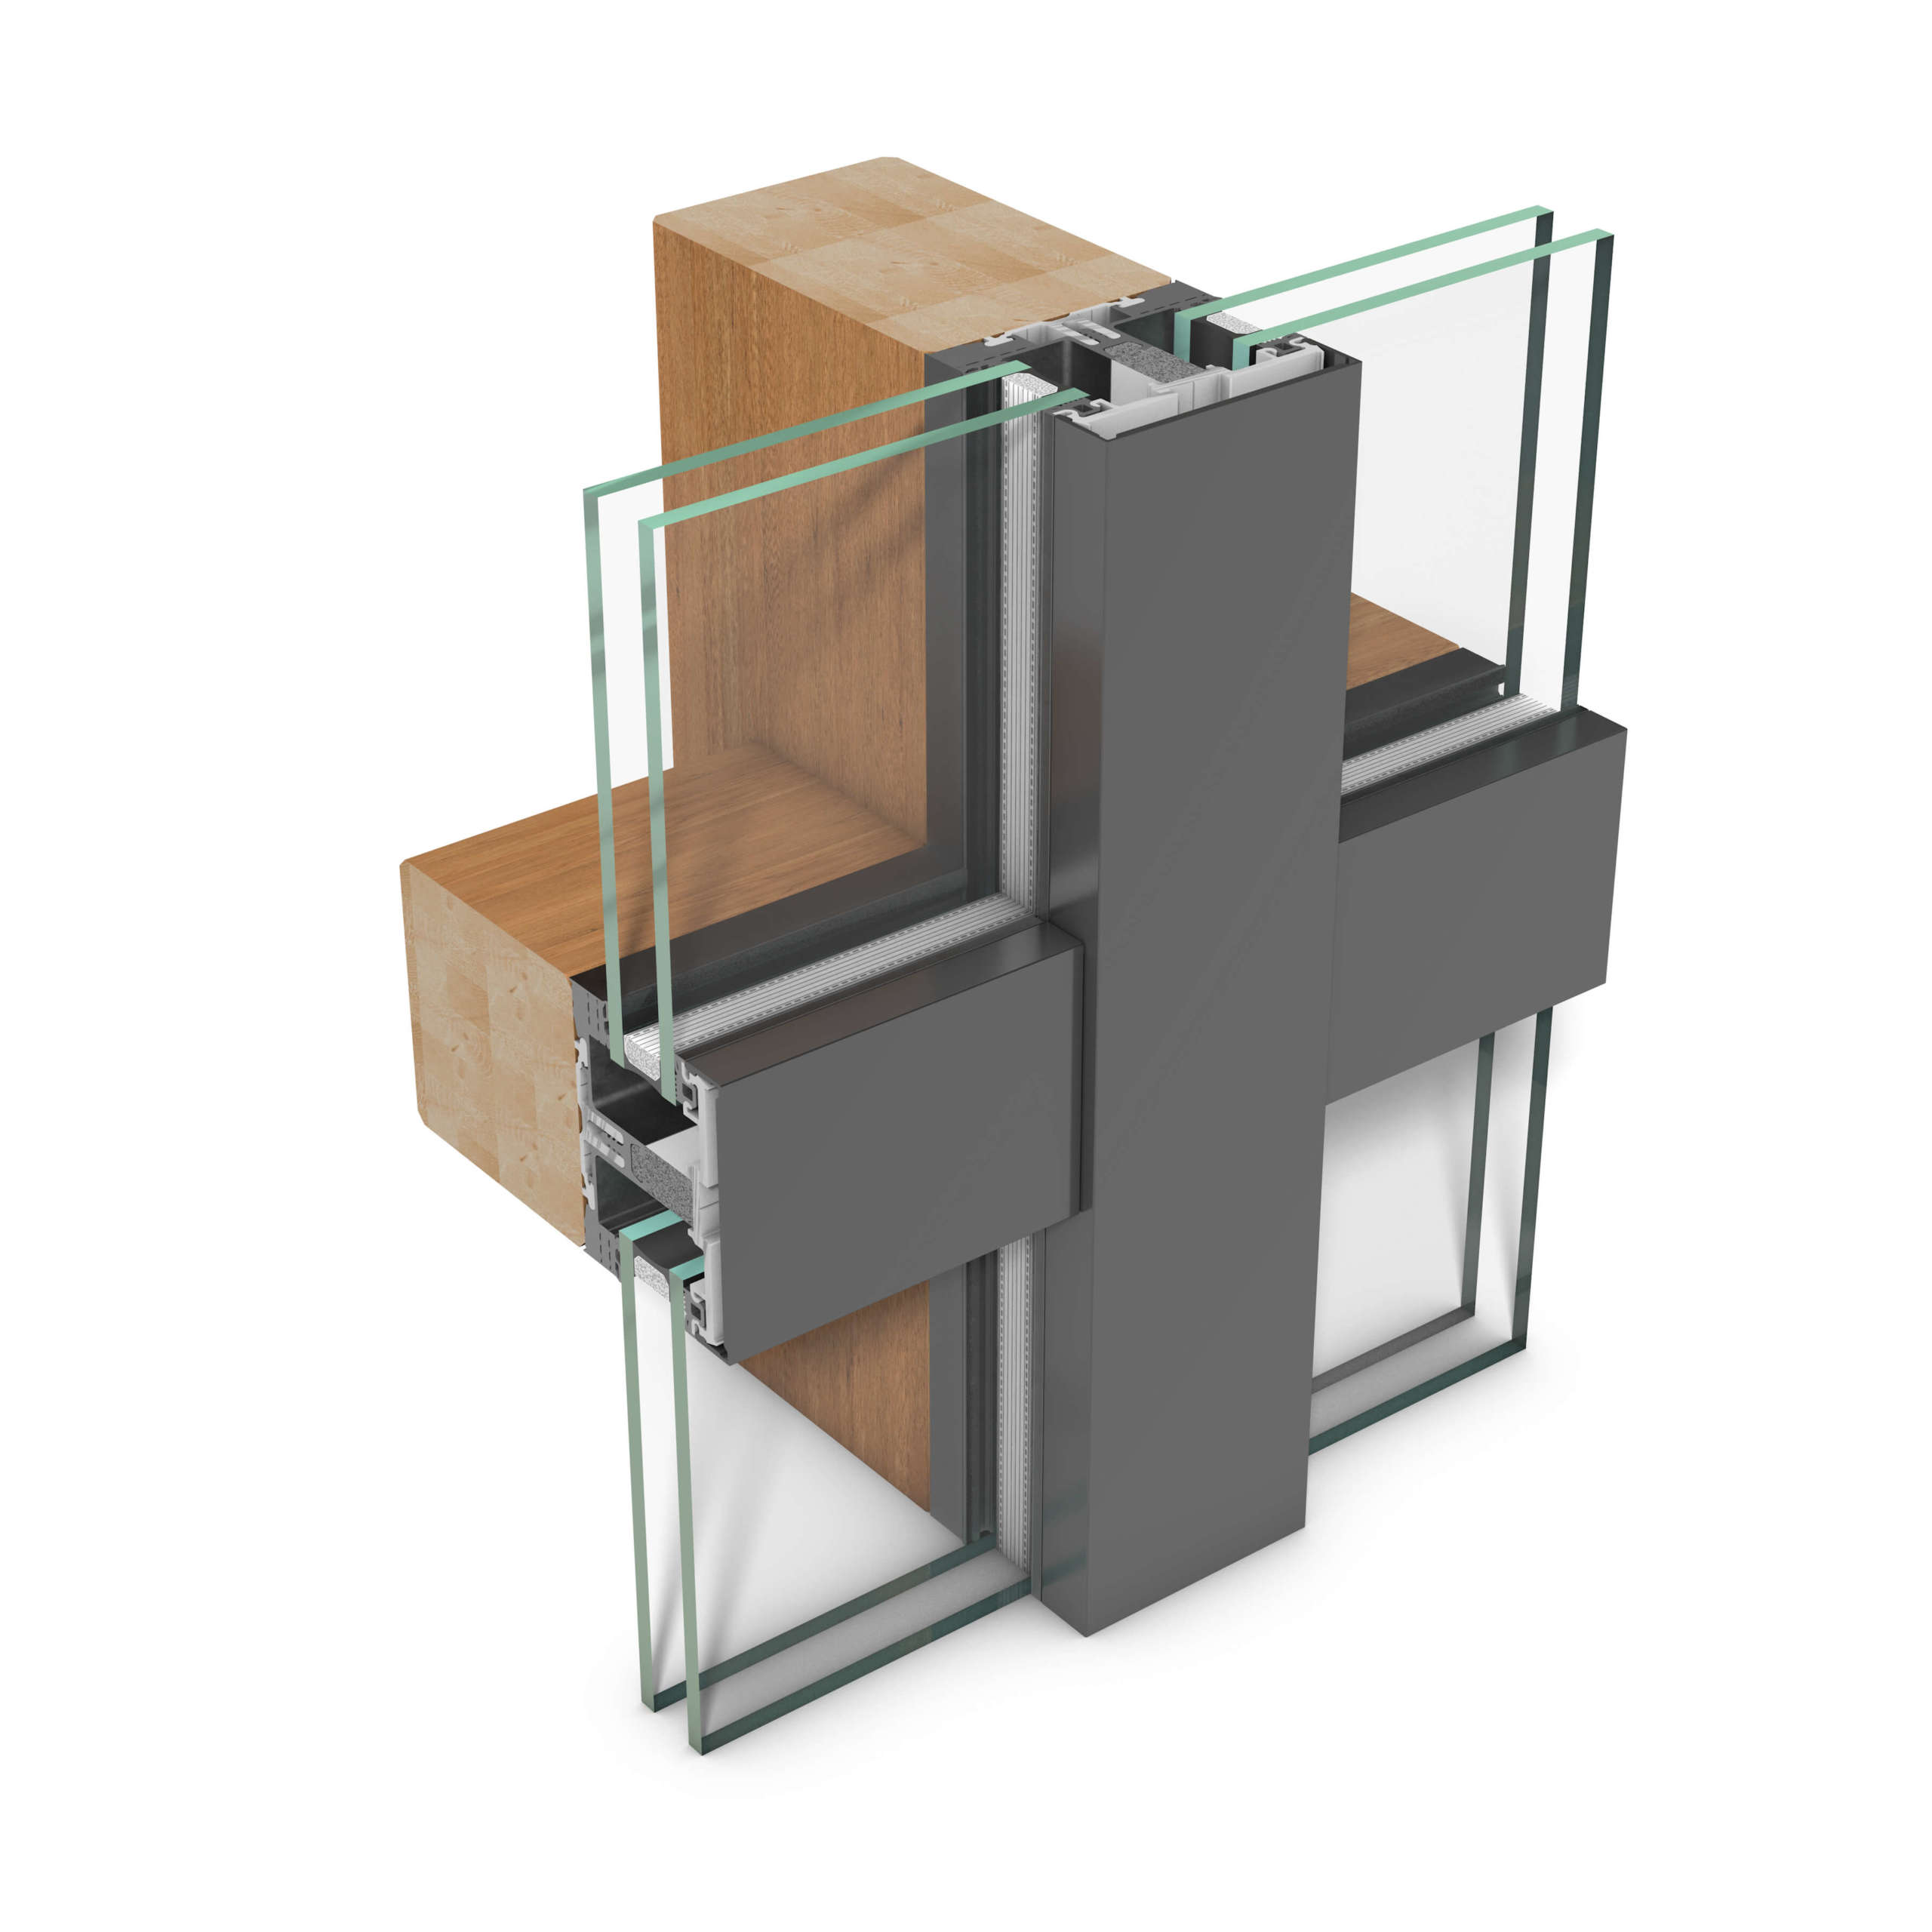 rp tec 80-1, add-on steel curtain wall for passive building requirements